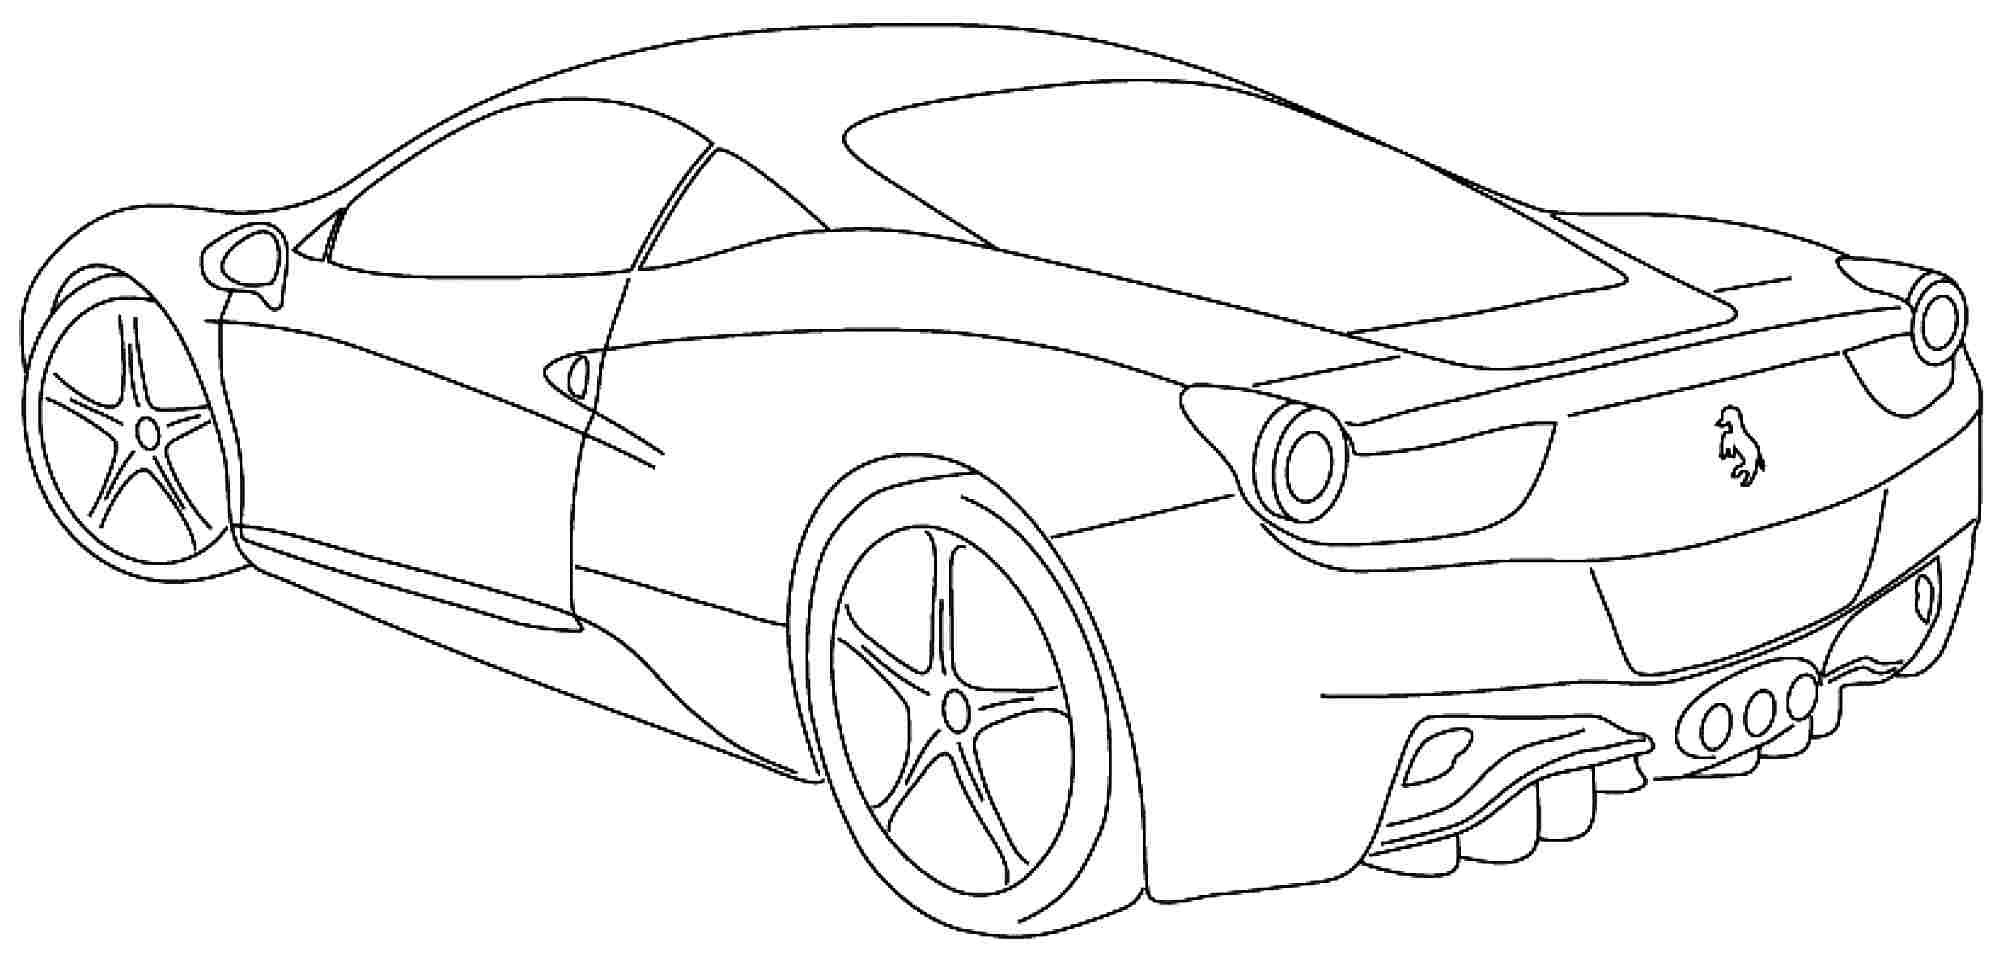 Car Coloring Pages For Boys
 Sports Cars Coloring Pages For Boys – Color Bros